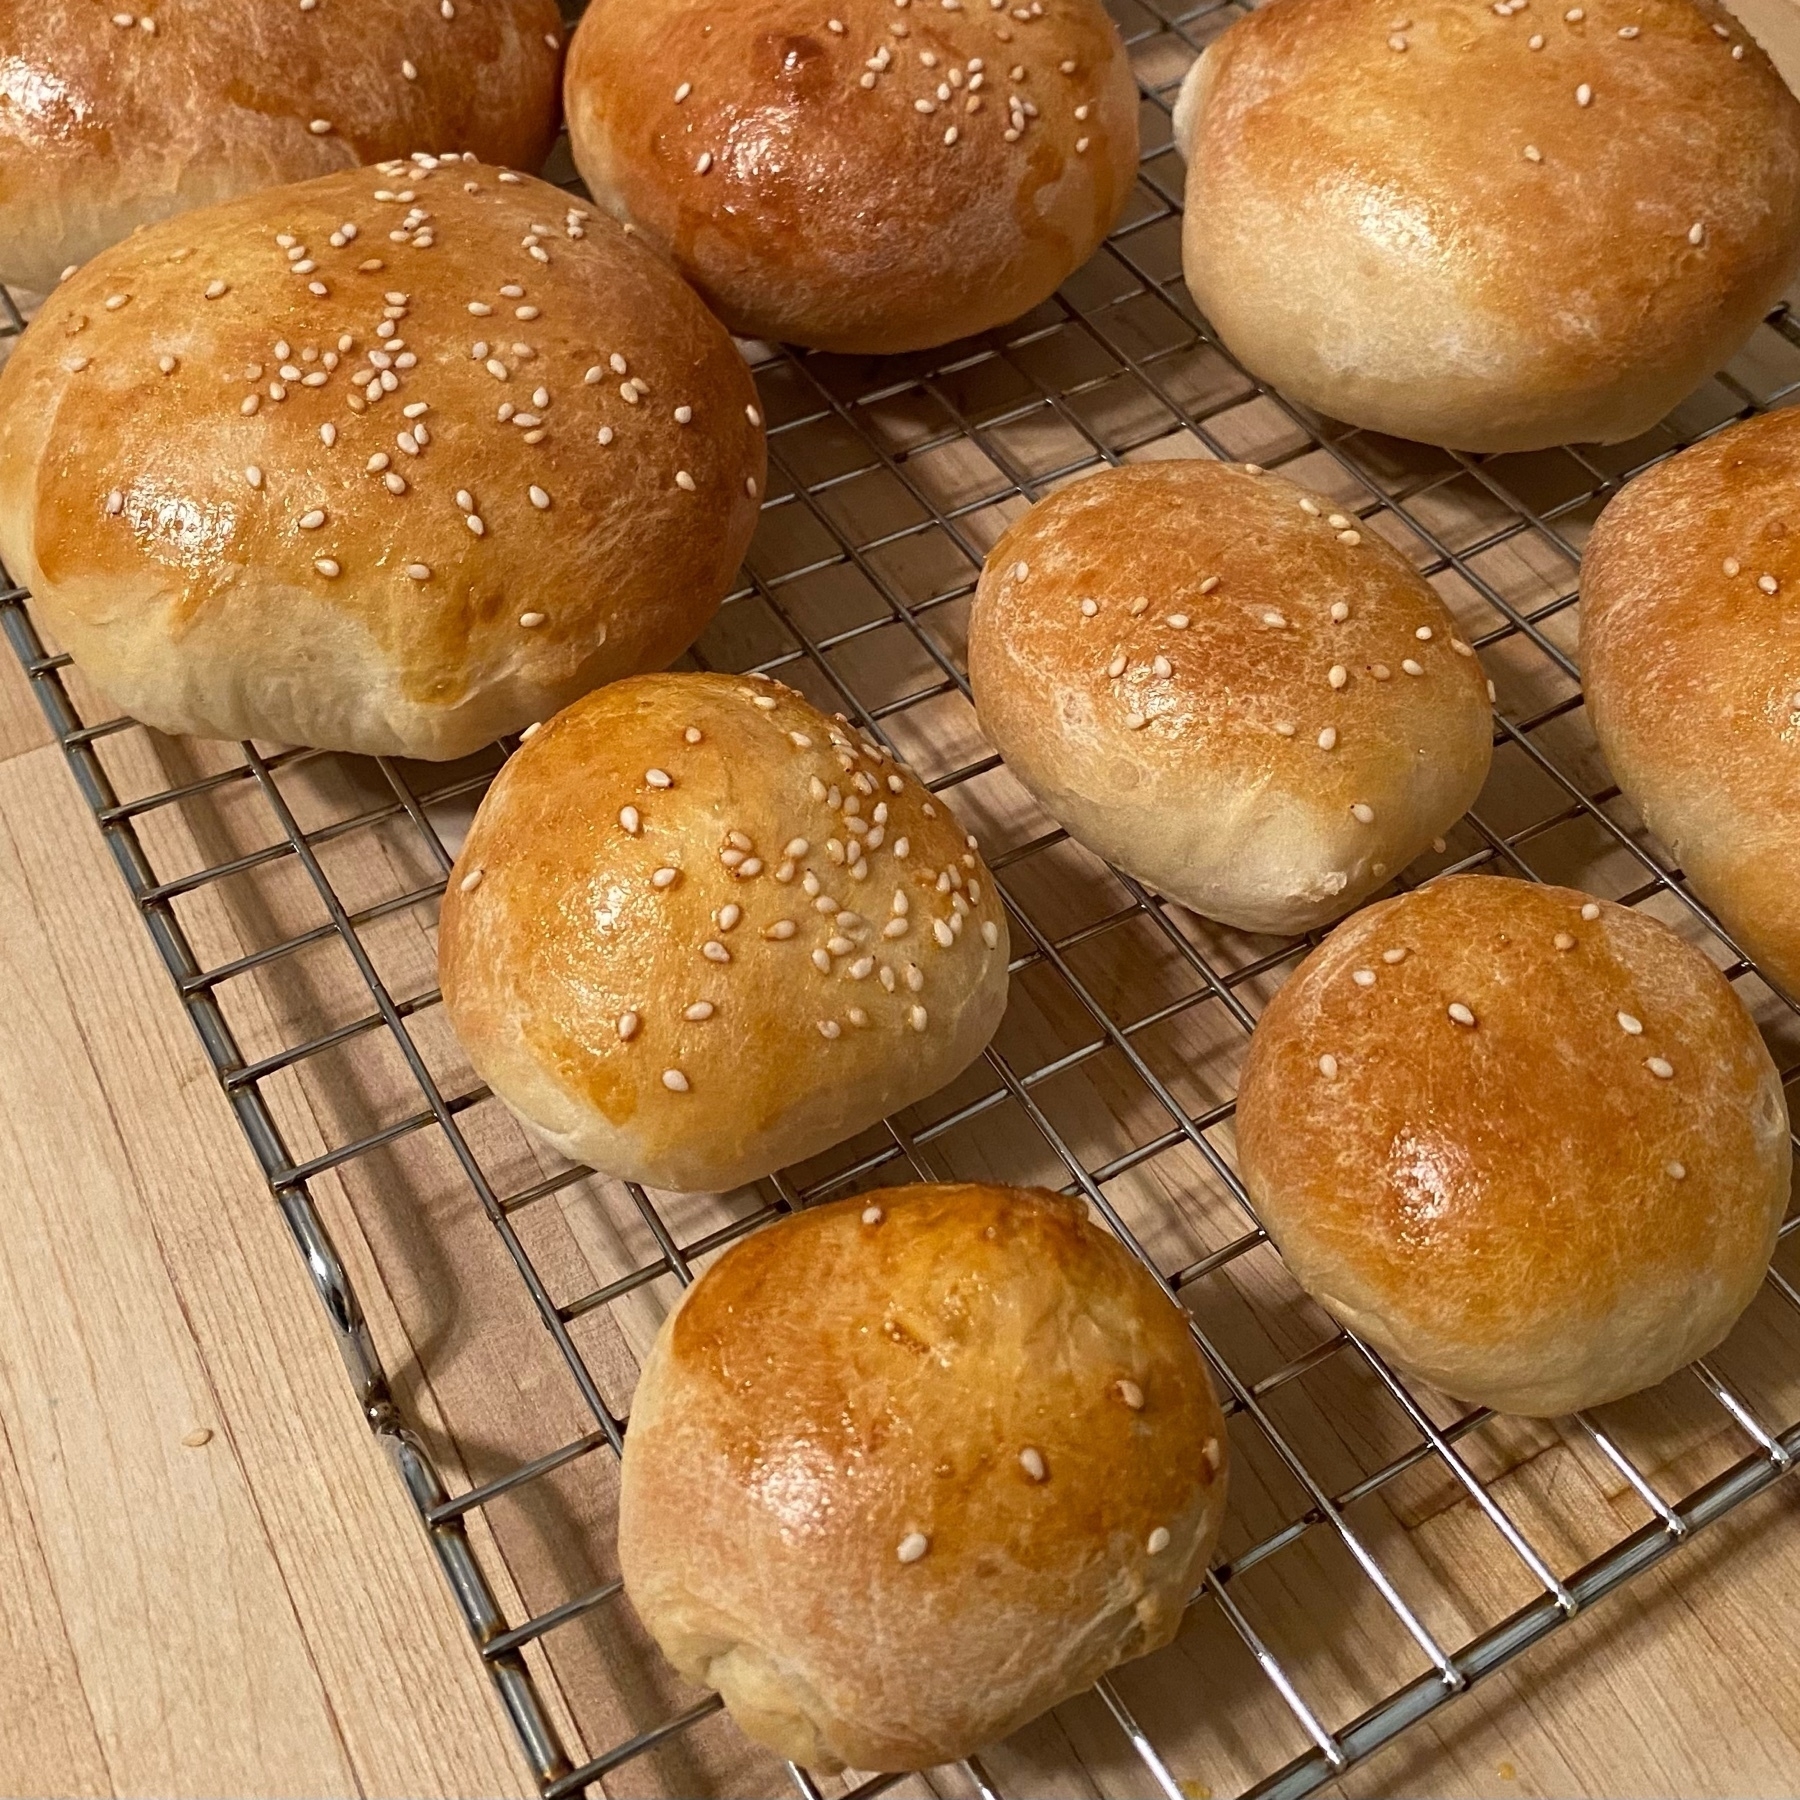 Picture of dragon baked buns with 4 much smaller than the other buns.